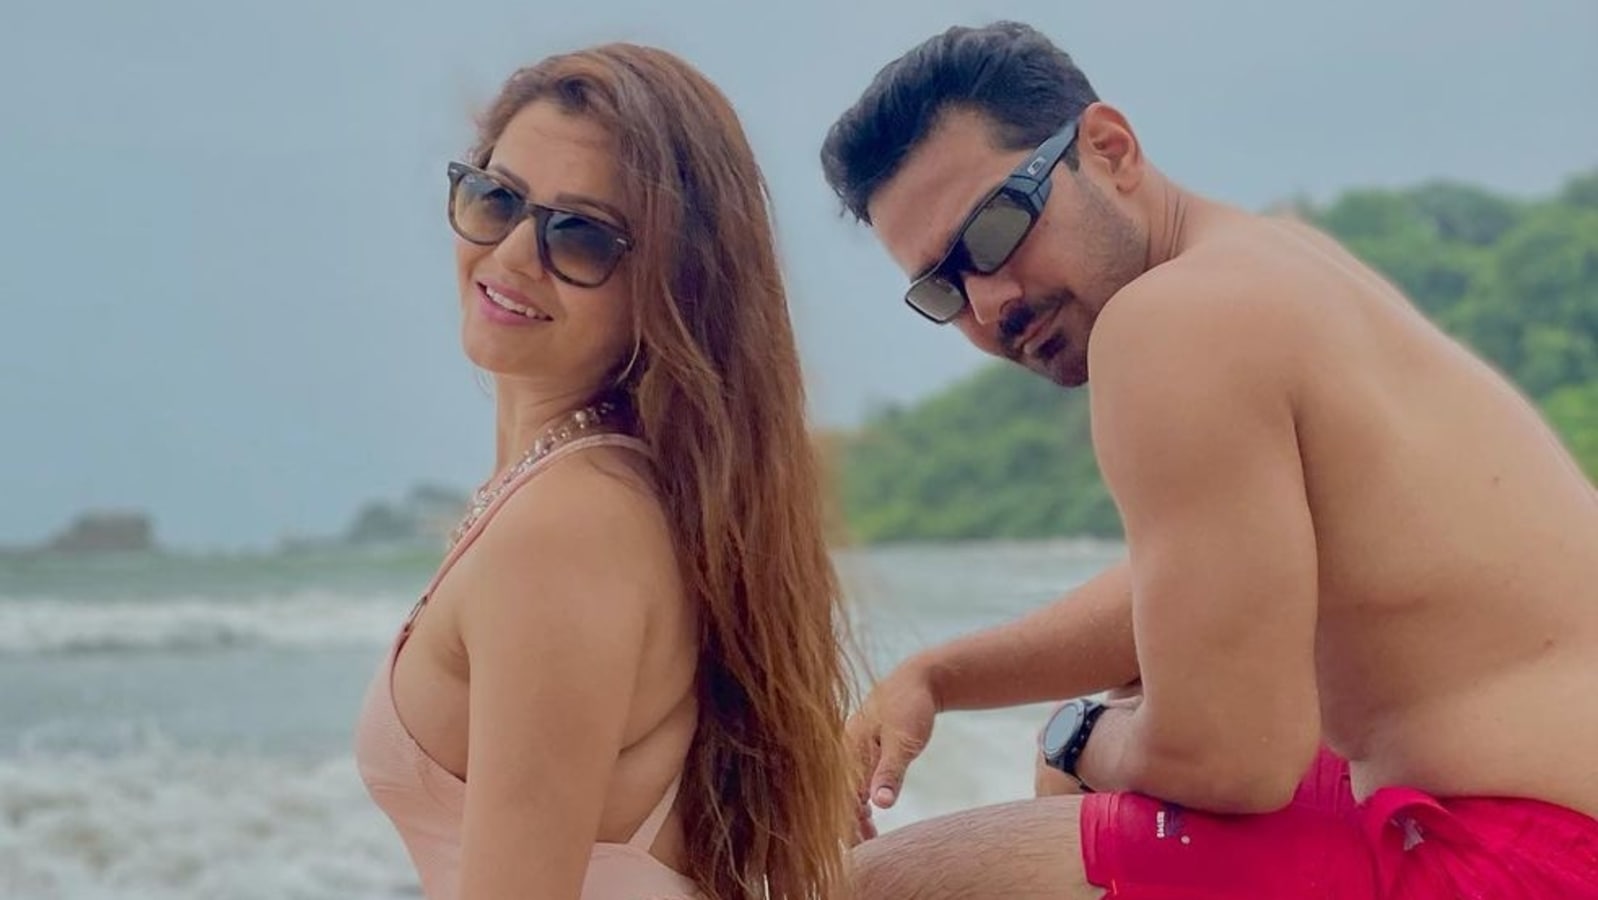 Shilpa Ka Husband Sex Sex Picture - Rubina Dilaik said this when asked if Abhinav Shukla's 'sex appeal' has  diminished after marriage - Hindustan Times